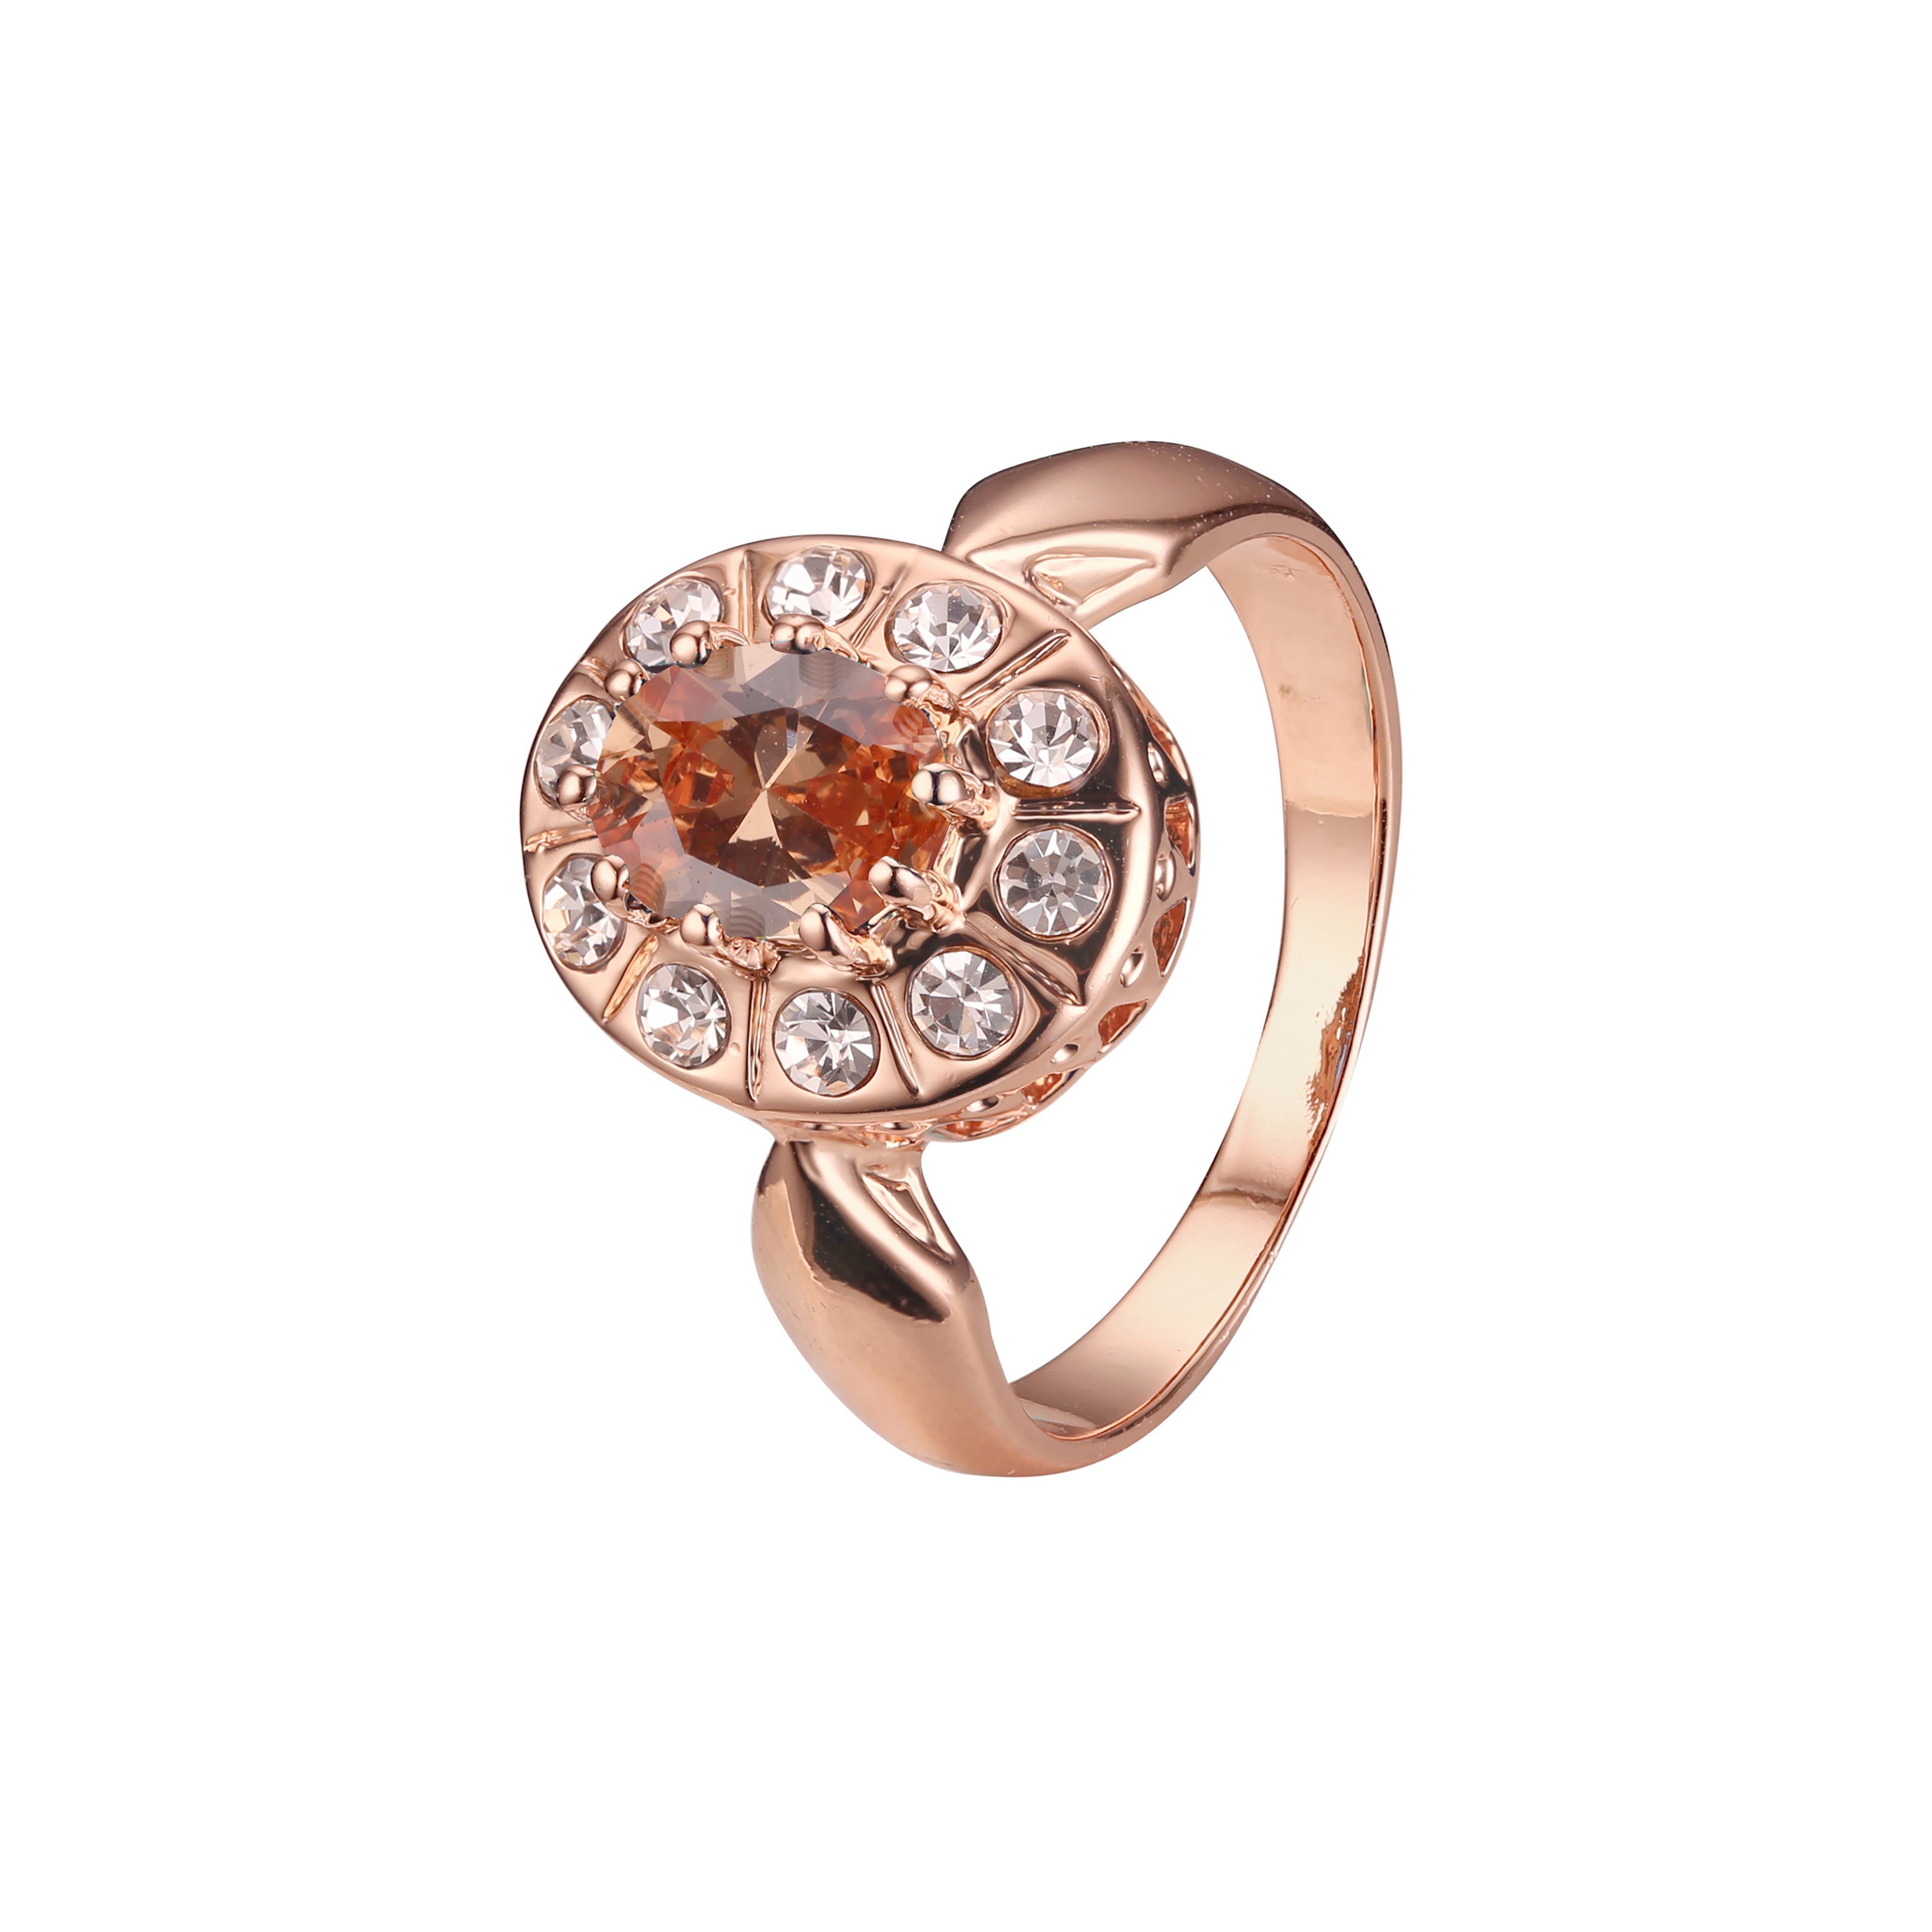 Halo rings in Rose Gold, two tone plating colors